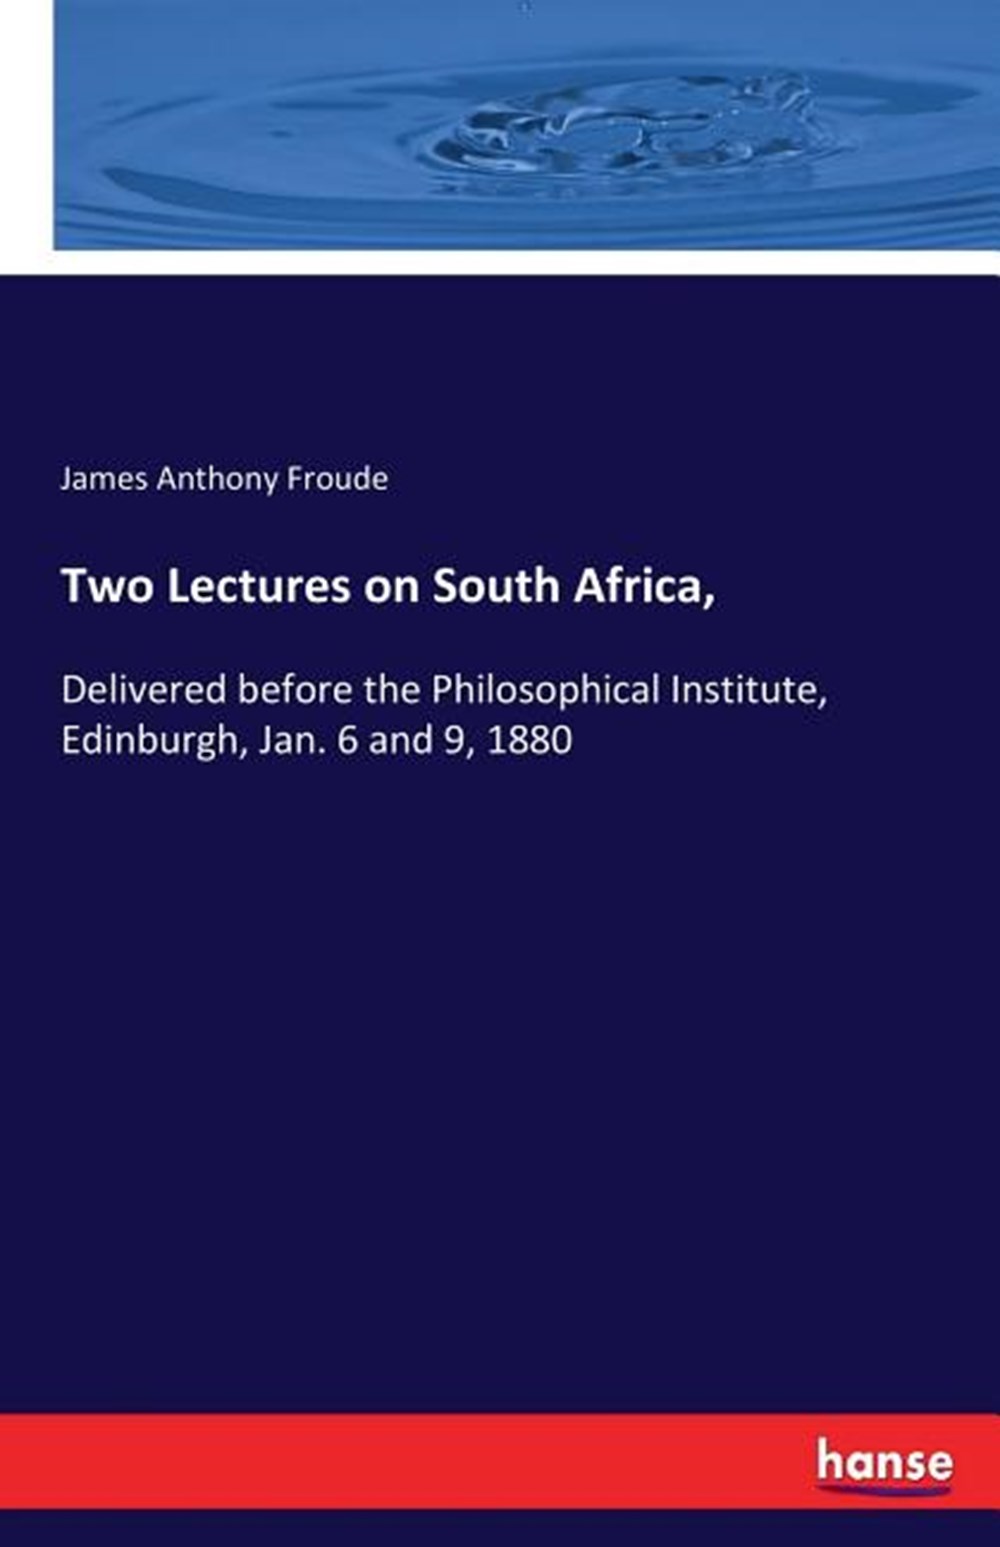 Two Lectures on South Africa,: Delivered before the Philosophical Institute, Edinburgh, Jan. 6 and 9